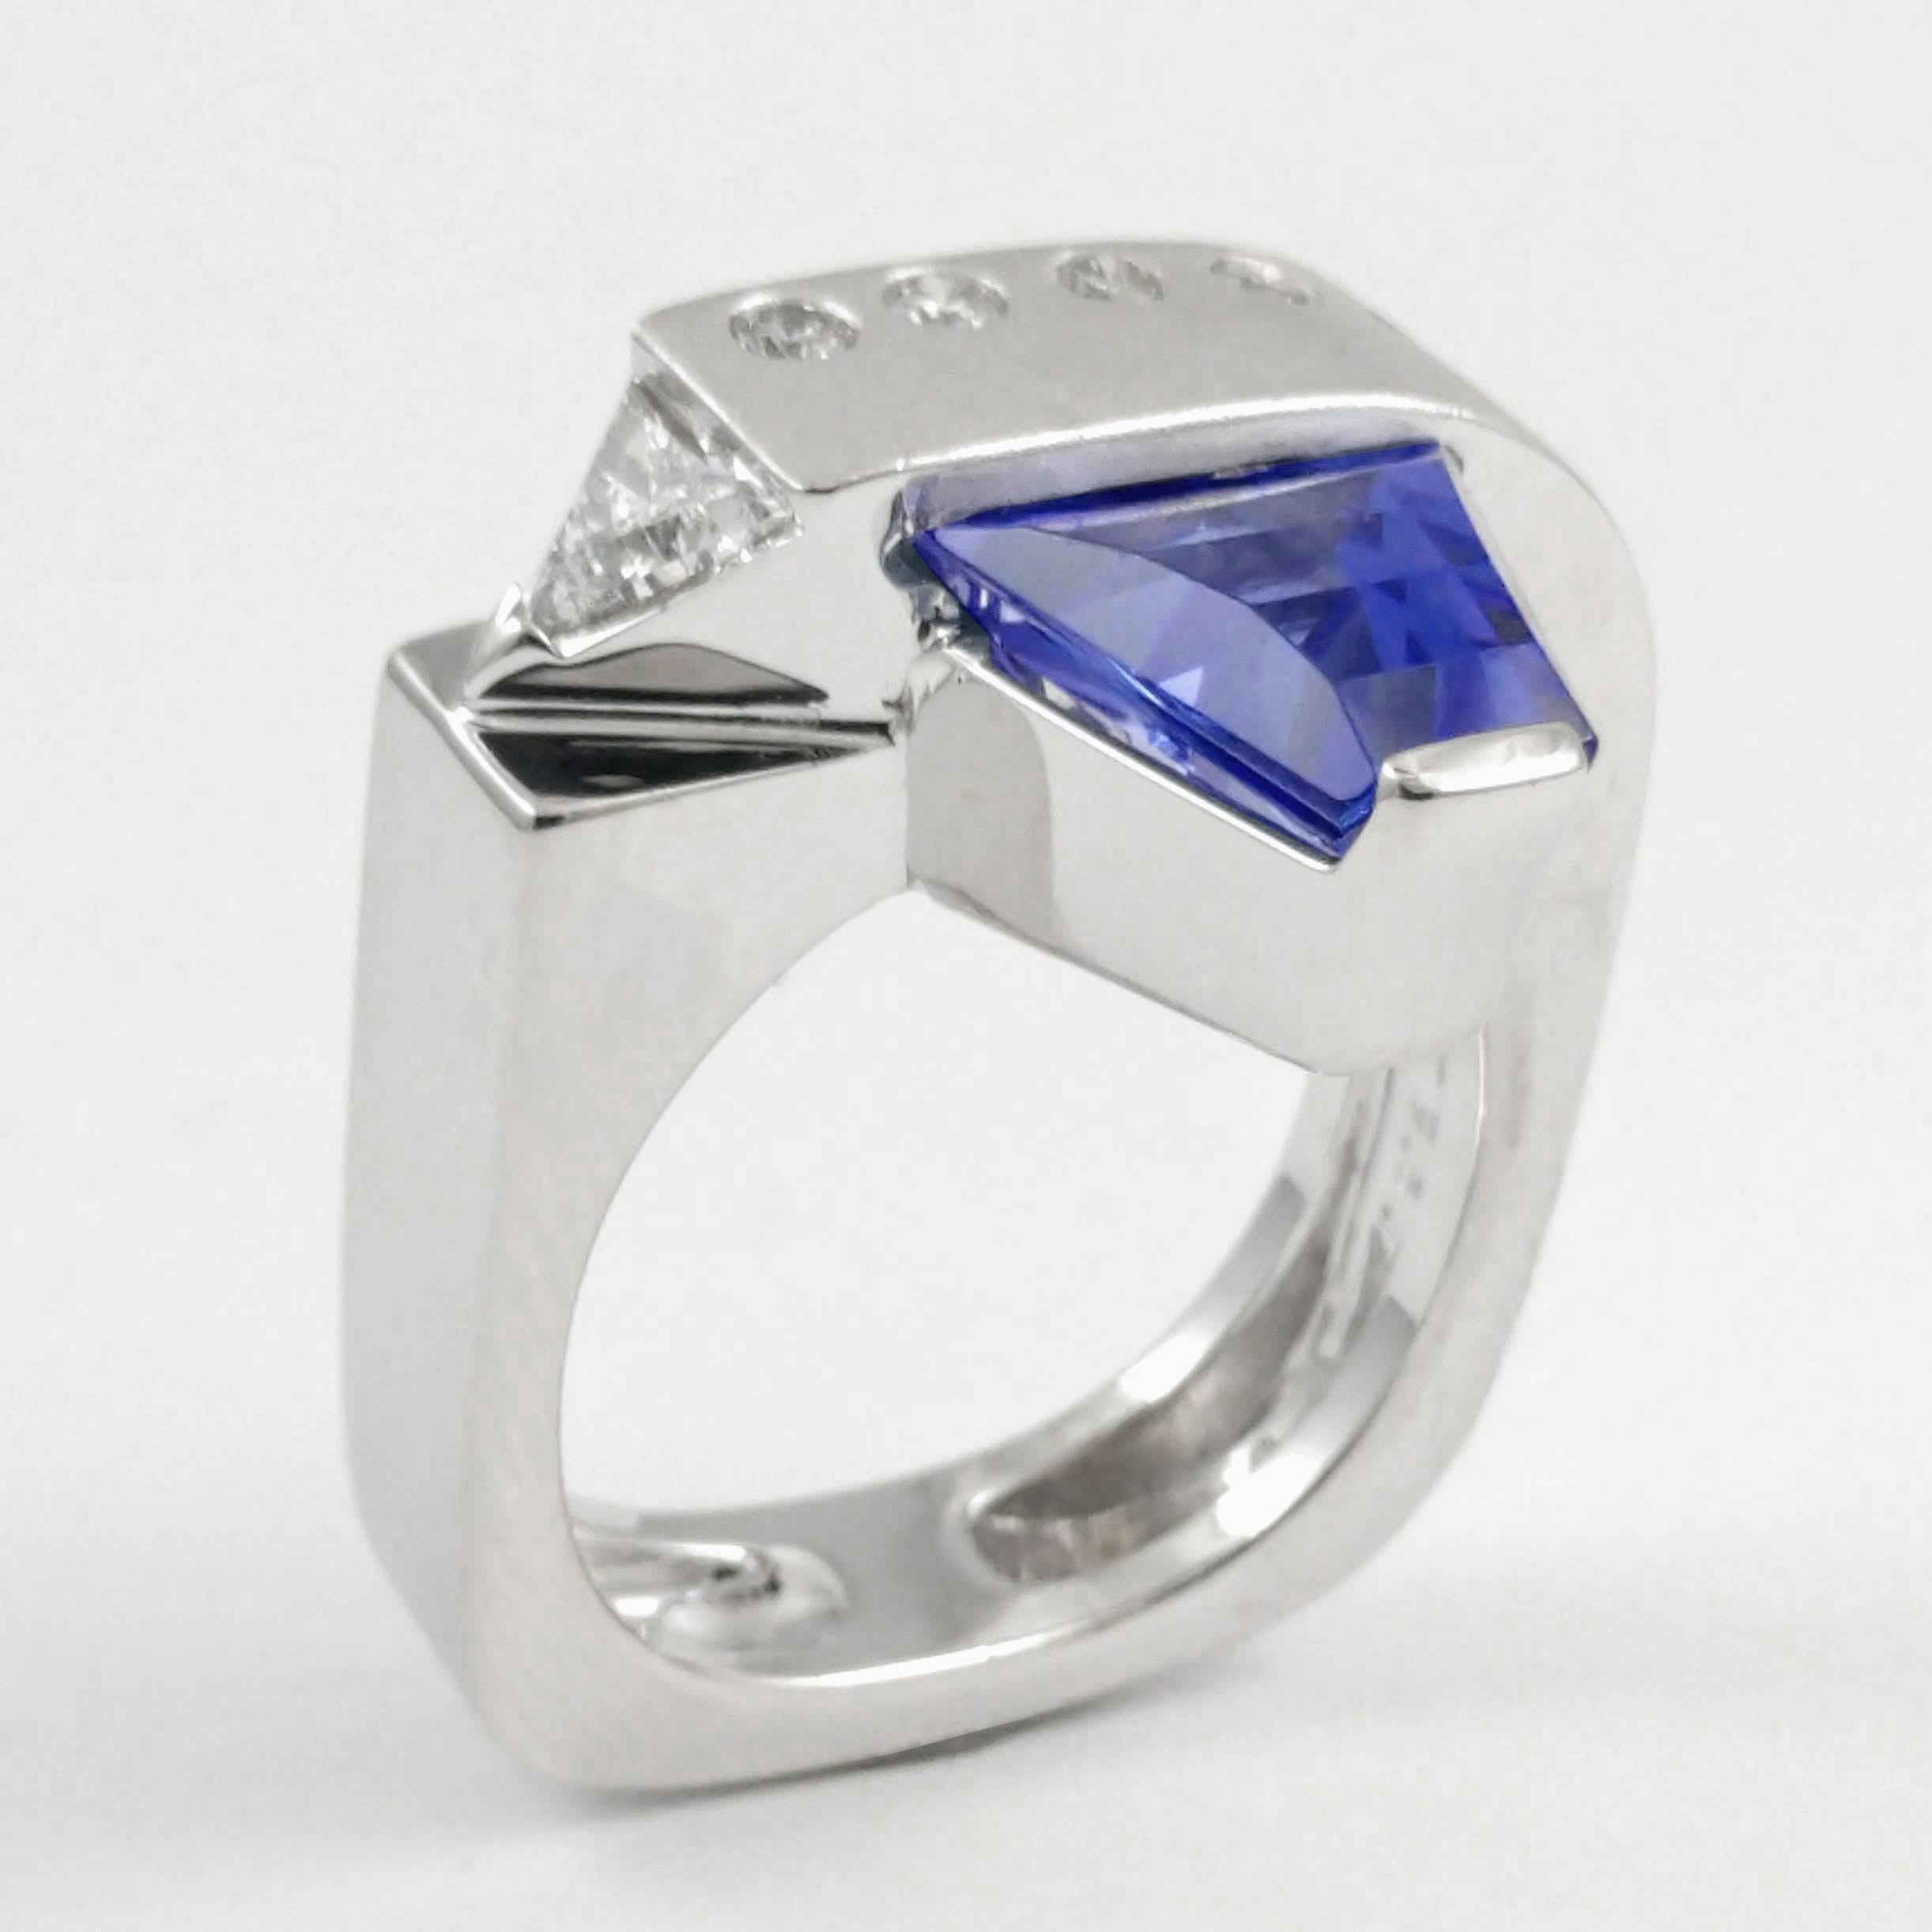 This ladies ring is distinctive and fashion-forward. Made in 18k white gold with a blue-purple fancy-cut 2.50ct Tanzanite. The ring is accented with one channel set trillion-cut diamond and six round brilliant diamonds that are each burnish set